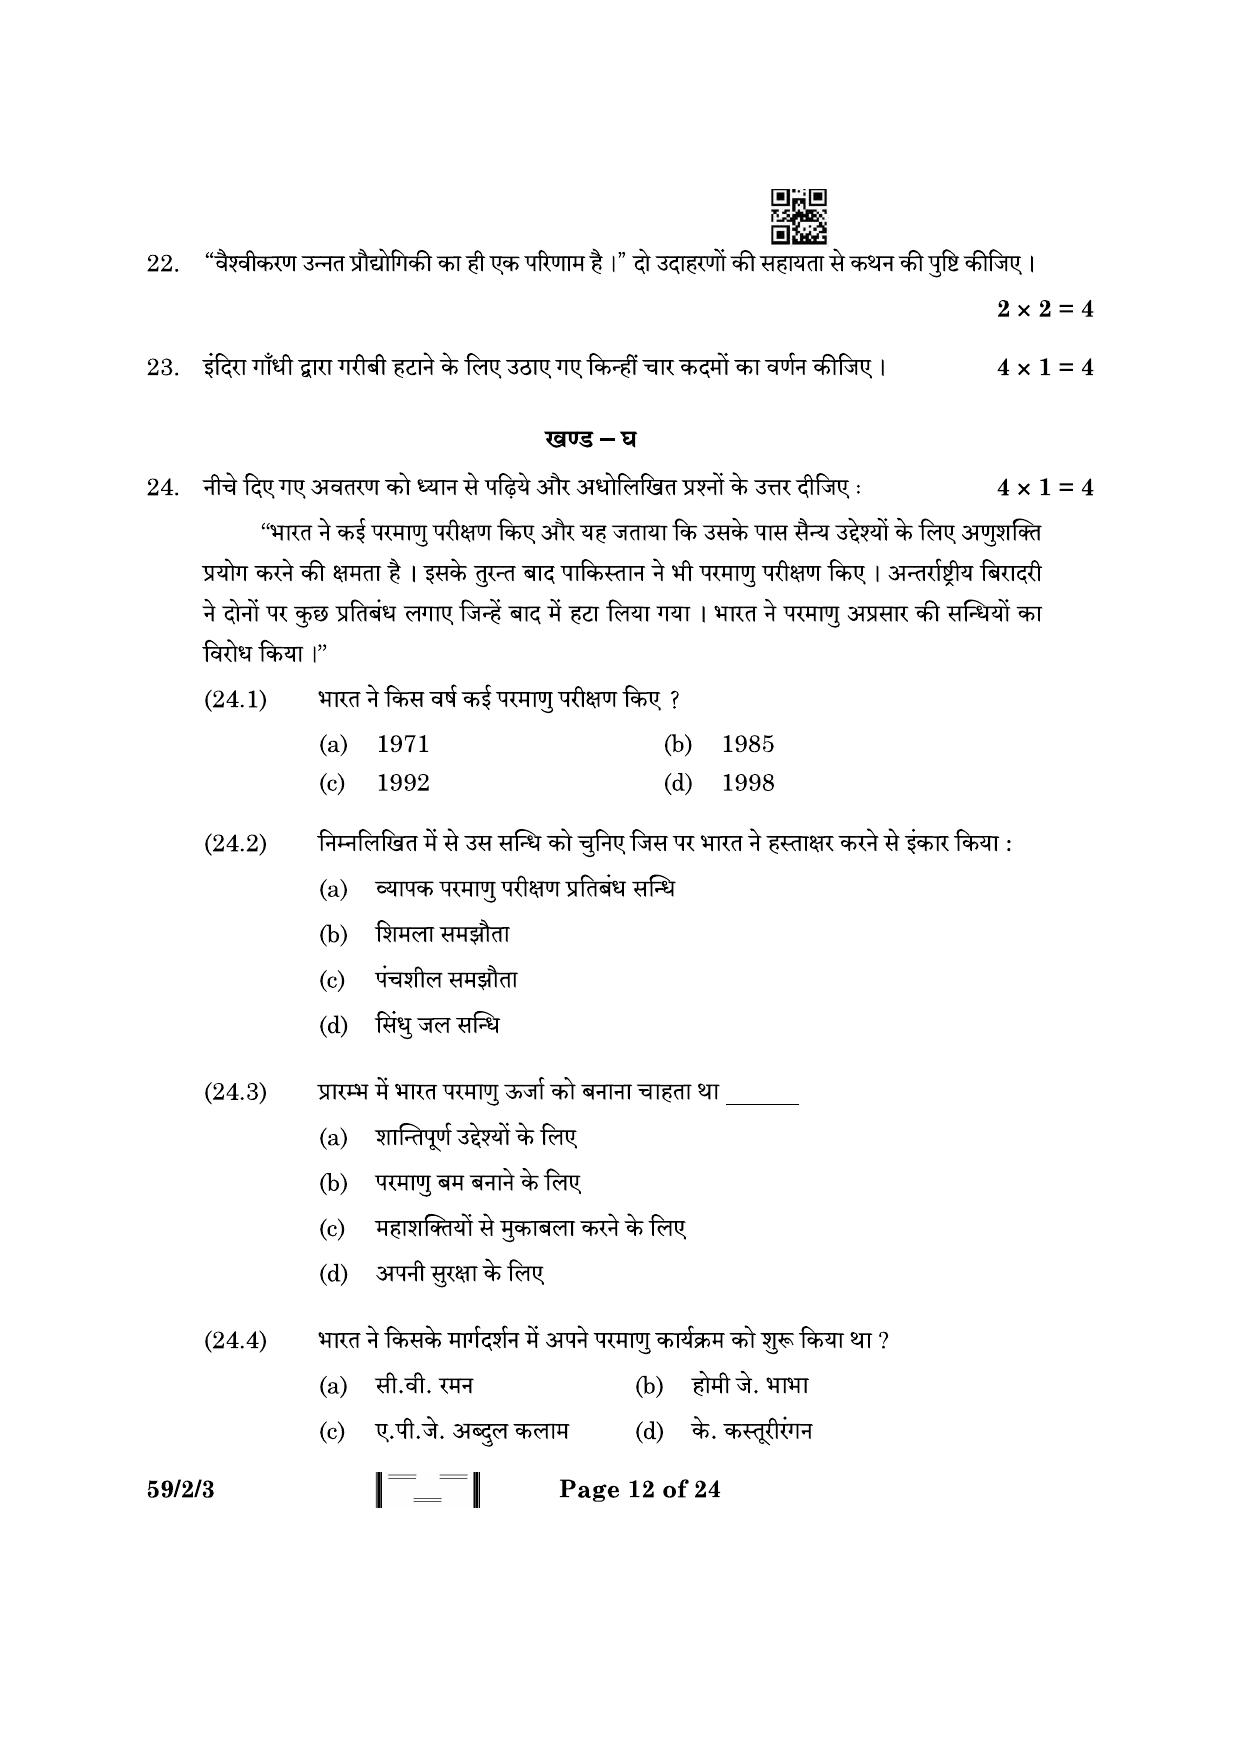 CBSE Class 12 59-2-3 Political Science 2023 Question Paper - Page 12